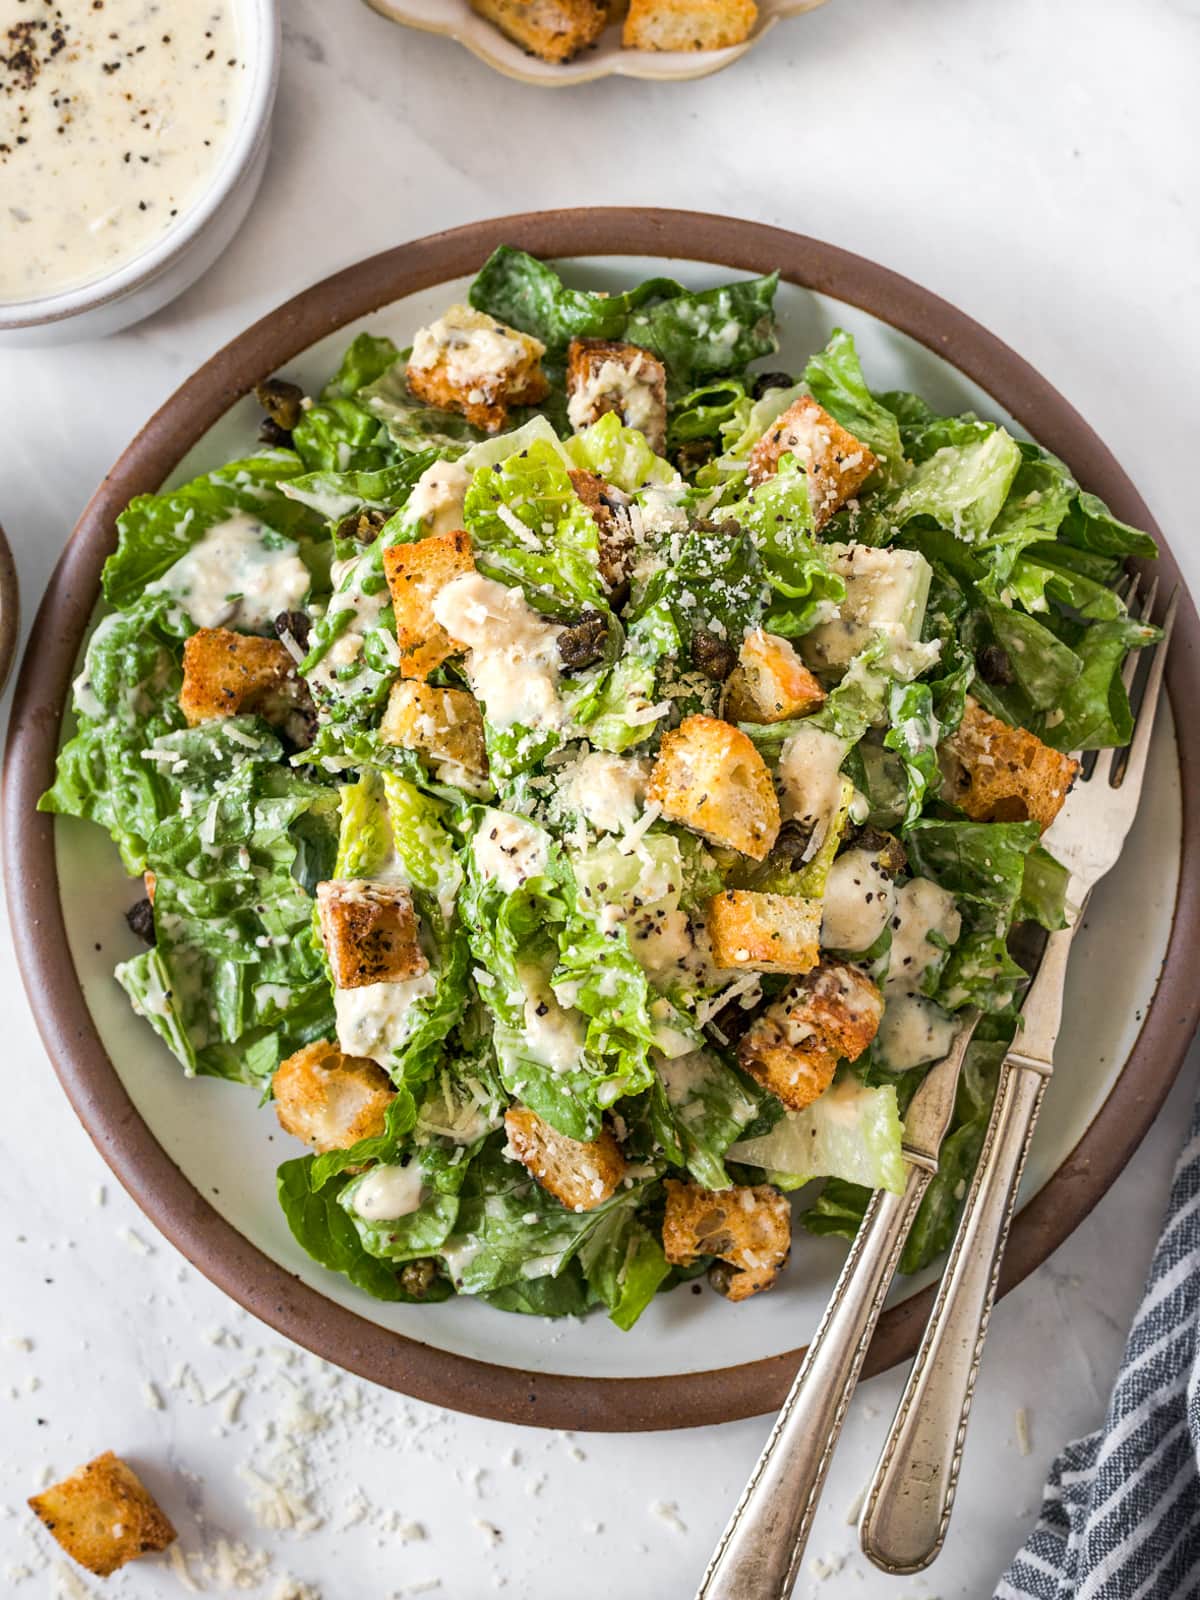 Heaping plate of vegan caesar salad with croutons surrounded by bowls of toppings.